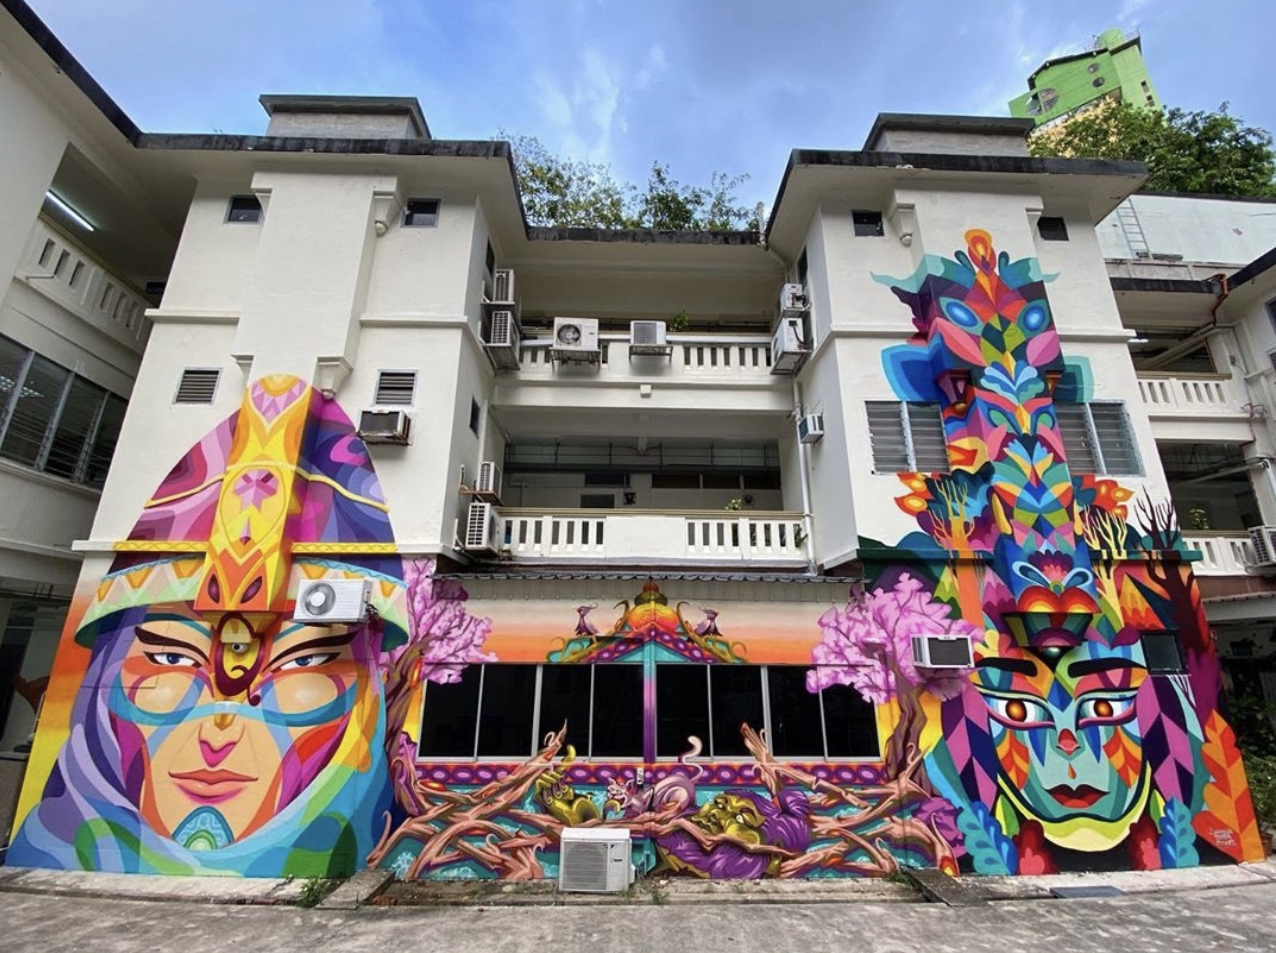 Top Places To Find Street Art In Singapore